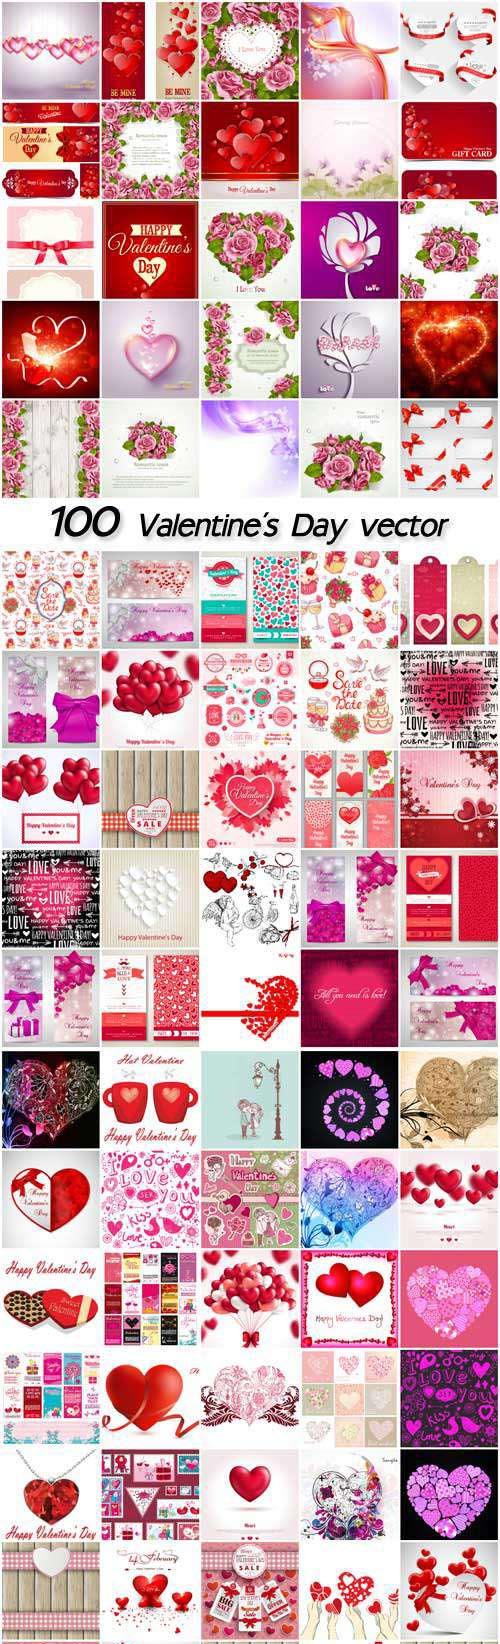 Valentine's Day, vector backgrounds romantic, hearts, cupids